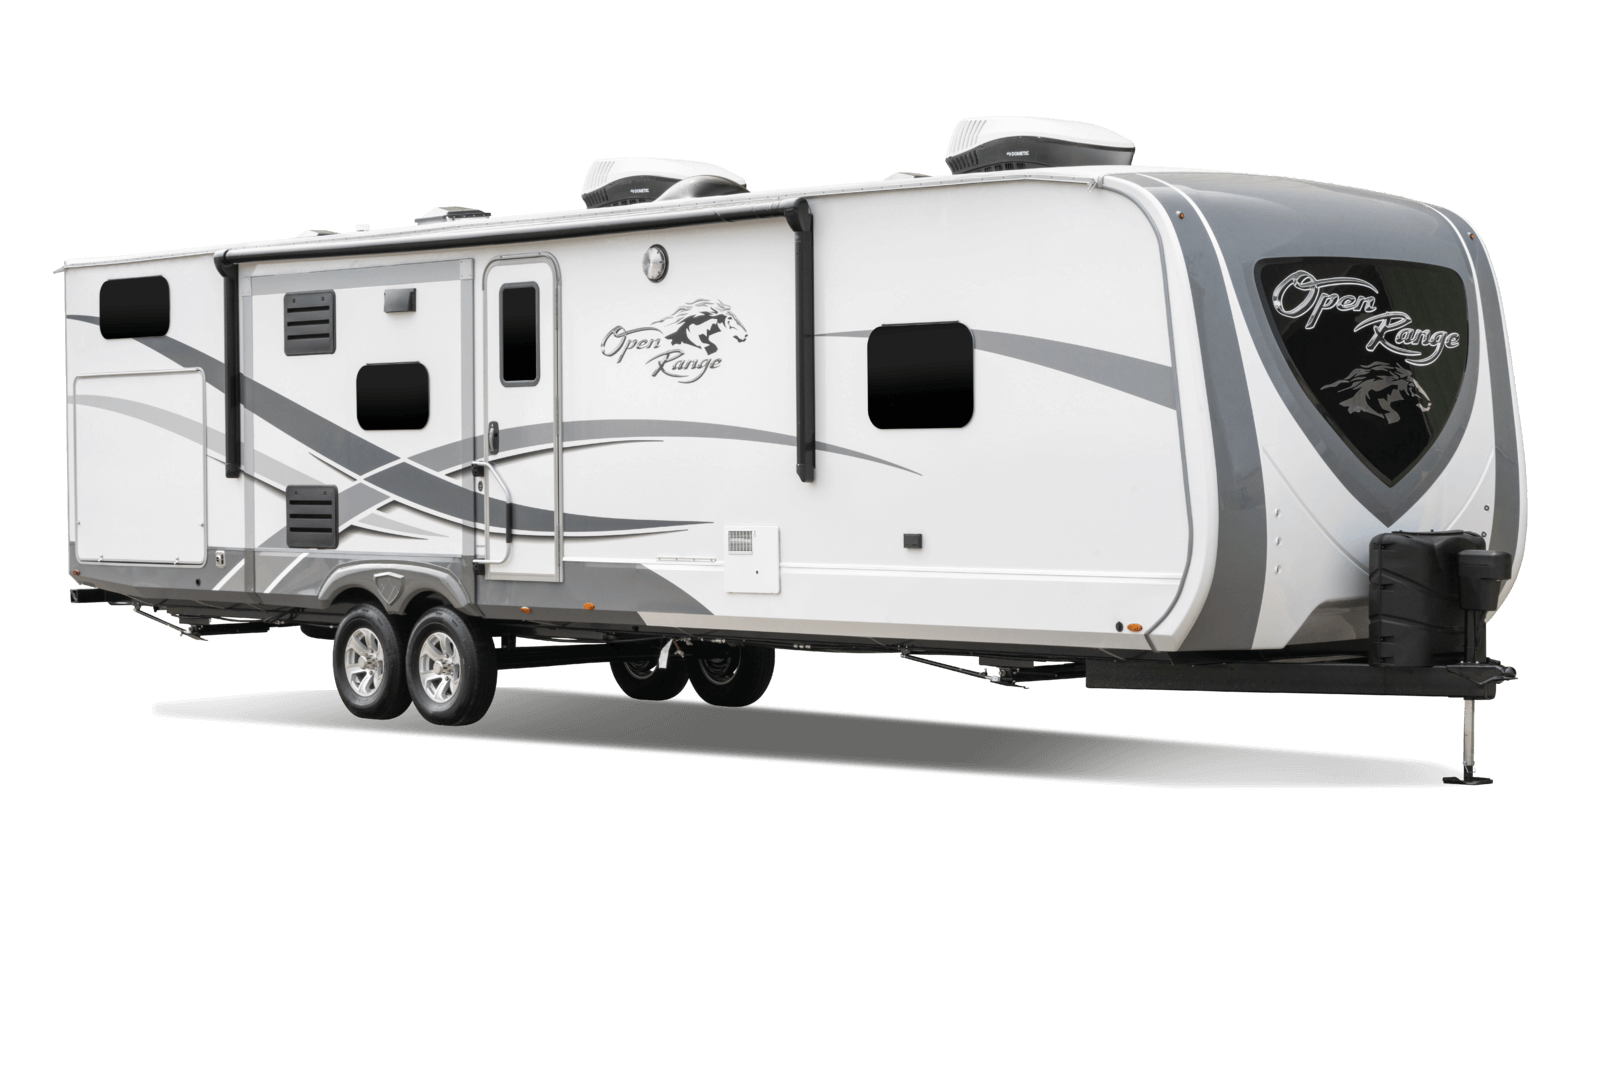 open range travel trailers for sale